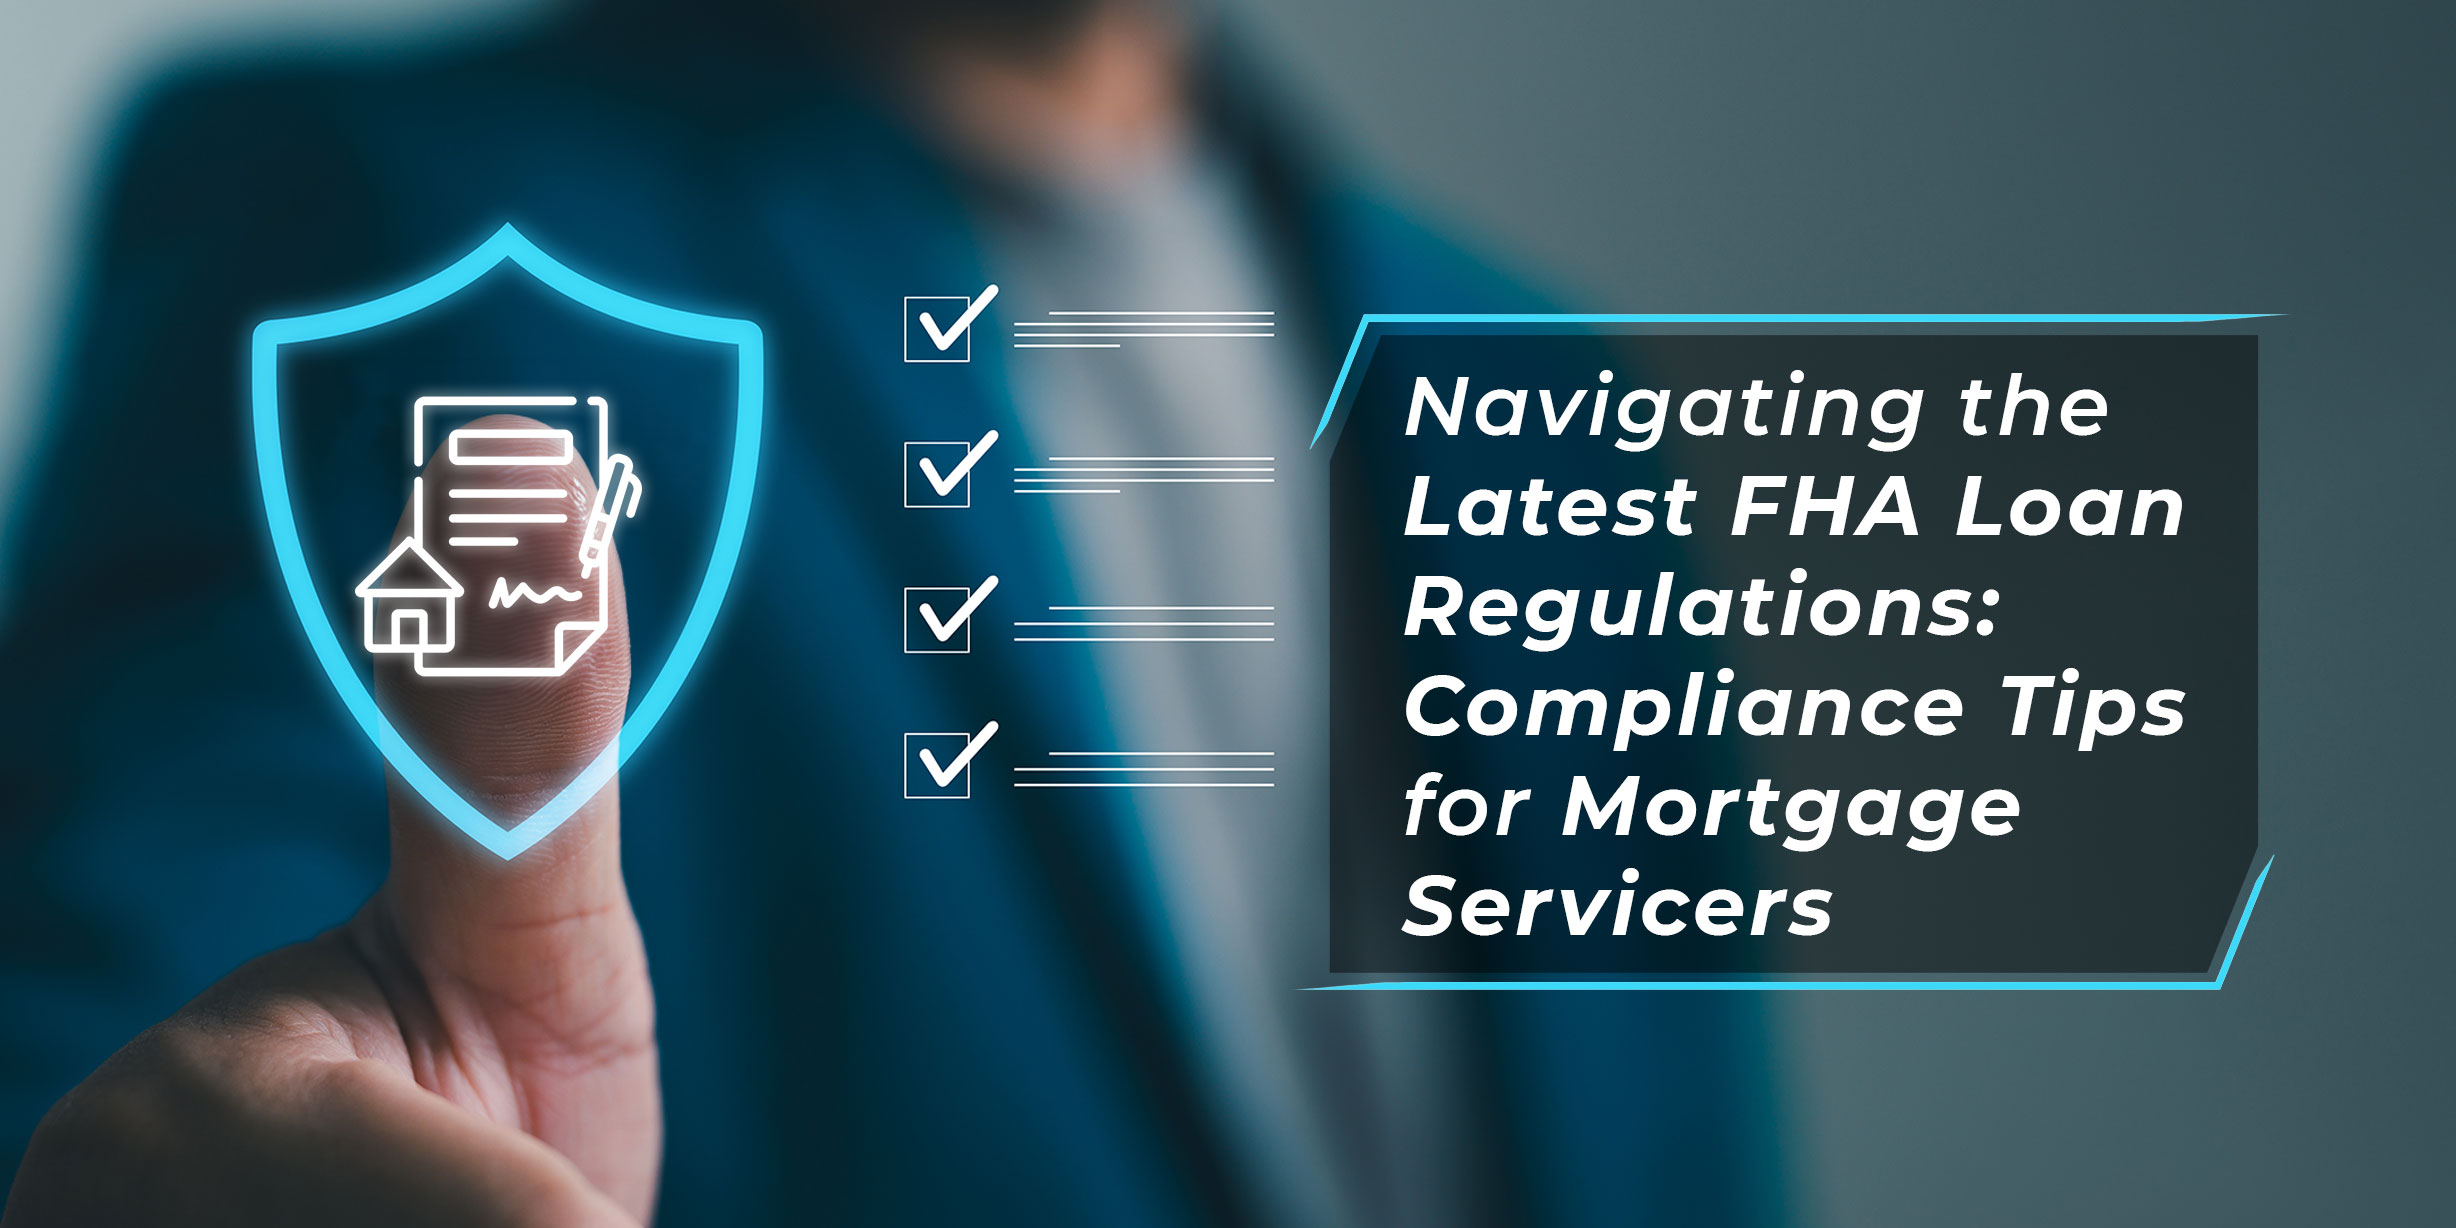 Navigating the Latest FHA Loan Regulations: Compliance Tips for Mortgage Servicers